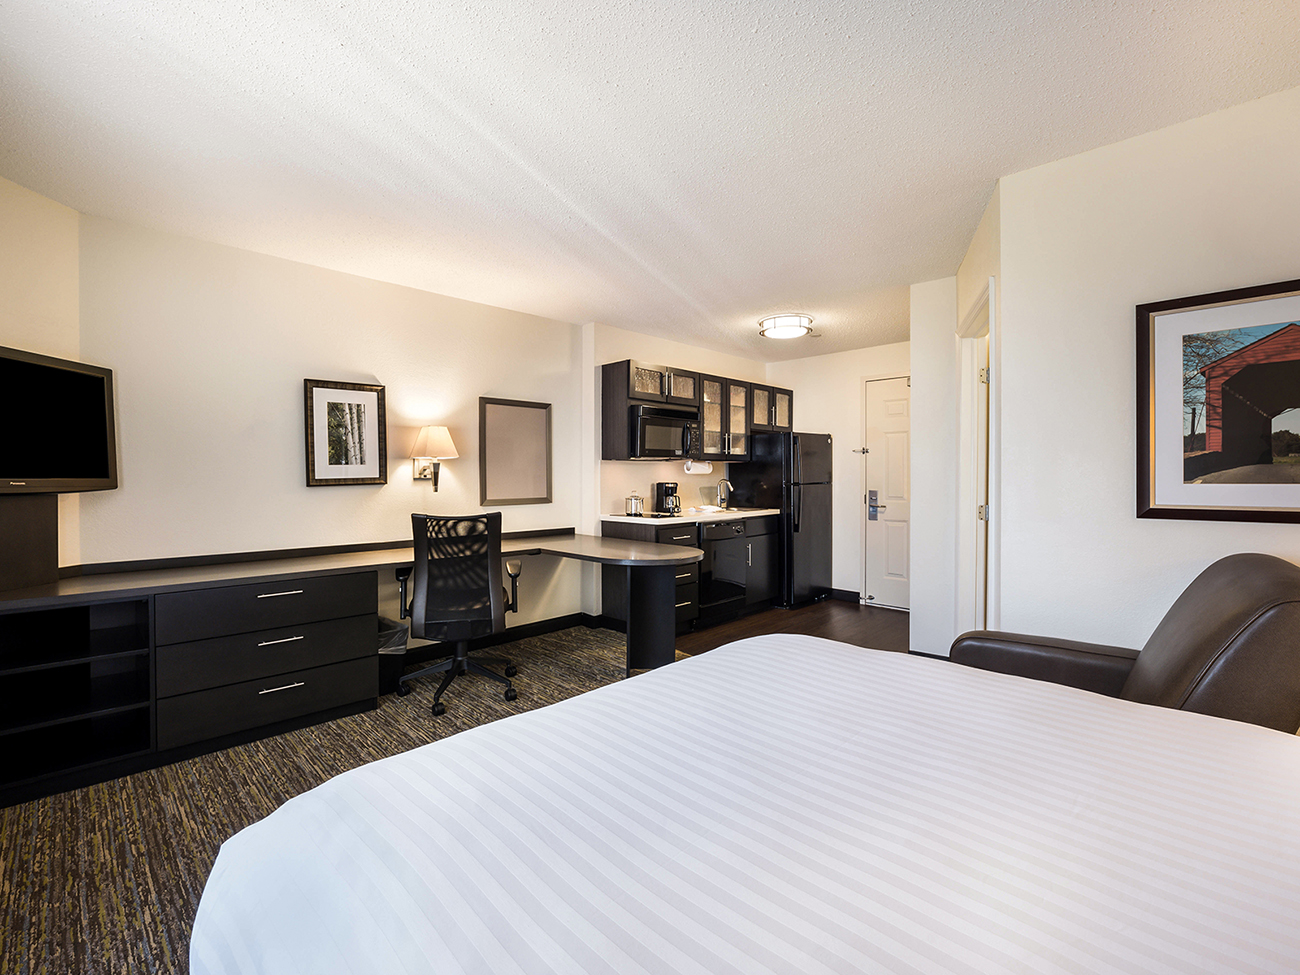 A Studio Suite at the Sonesta Simply Suites Chicago Libertyville hotel.